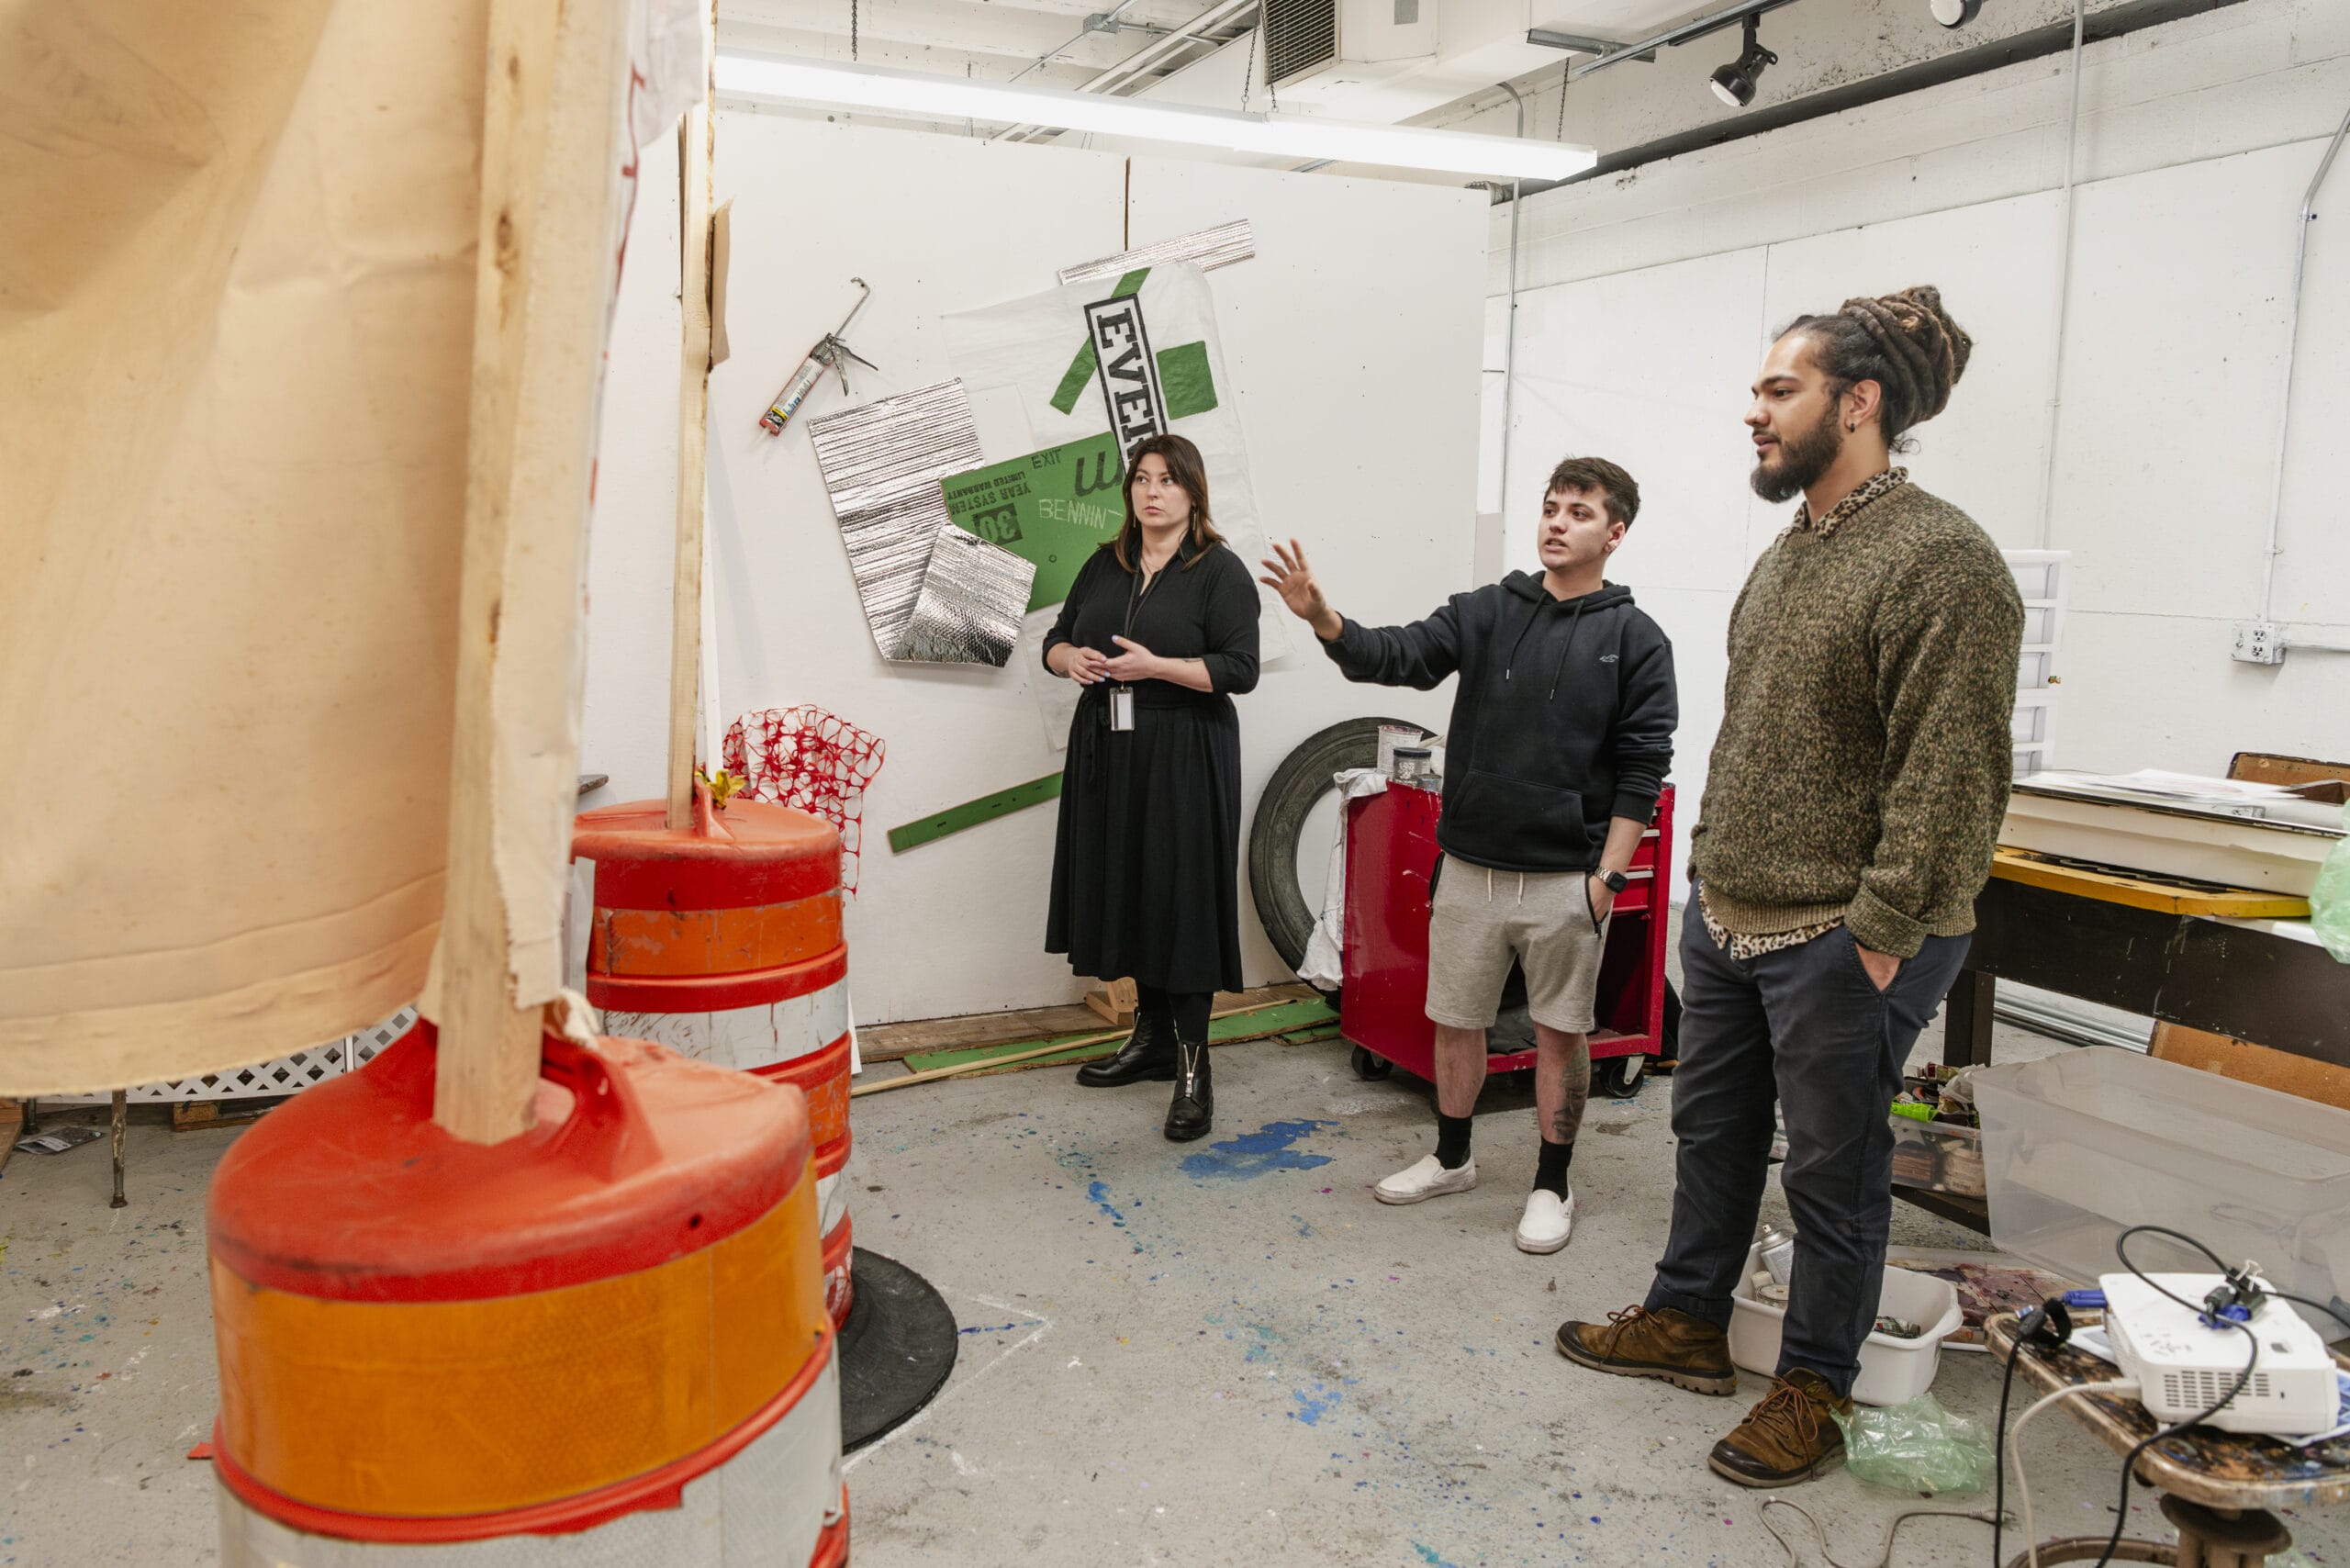 MFA Students looking at work in their studio space.